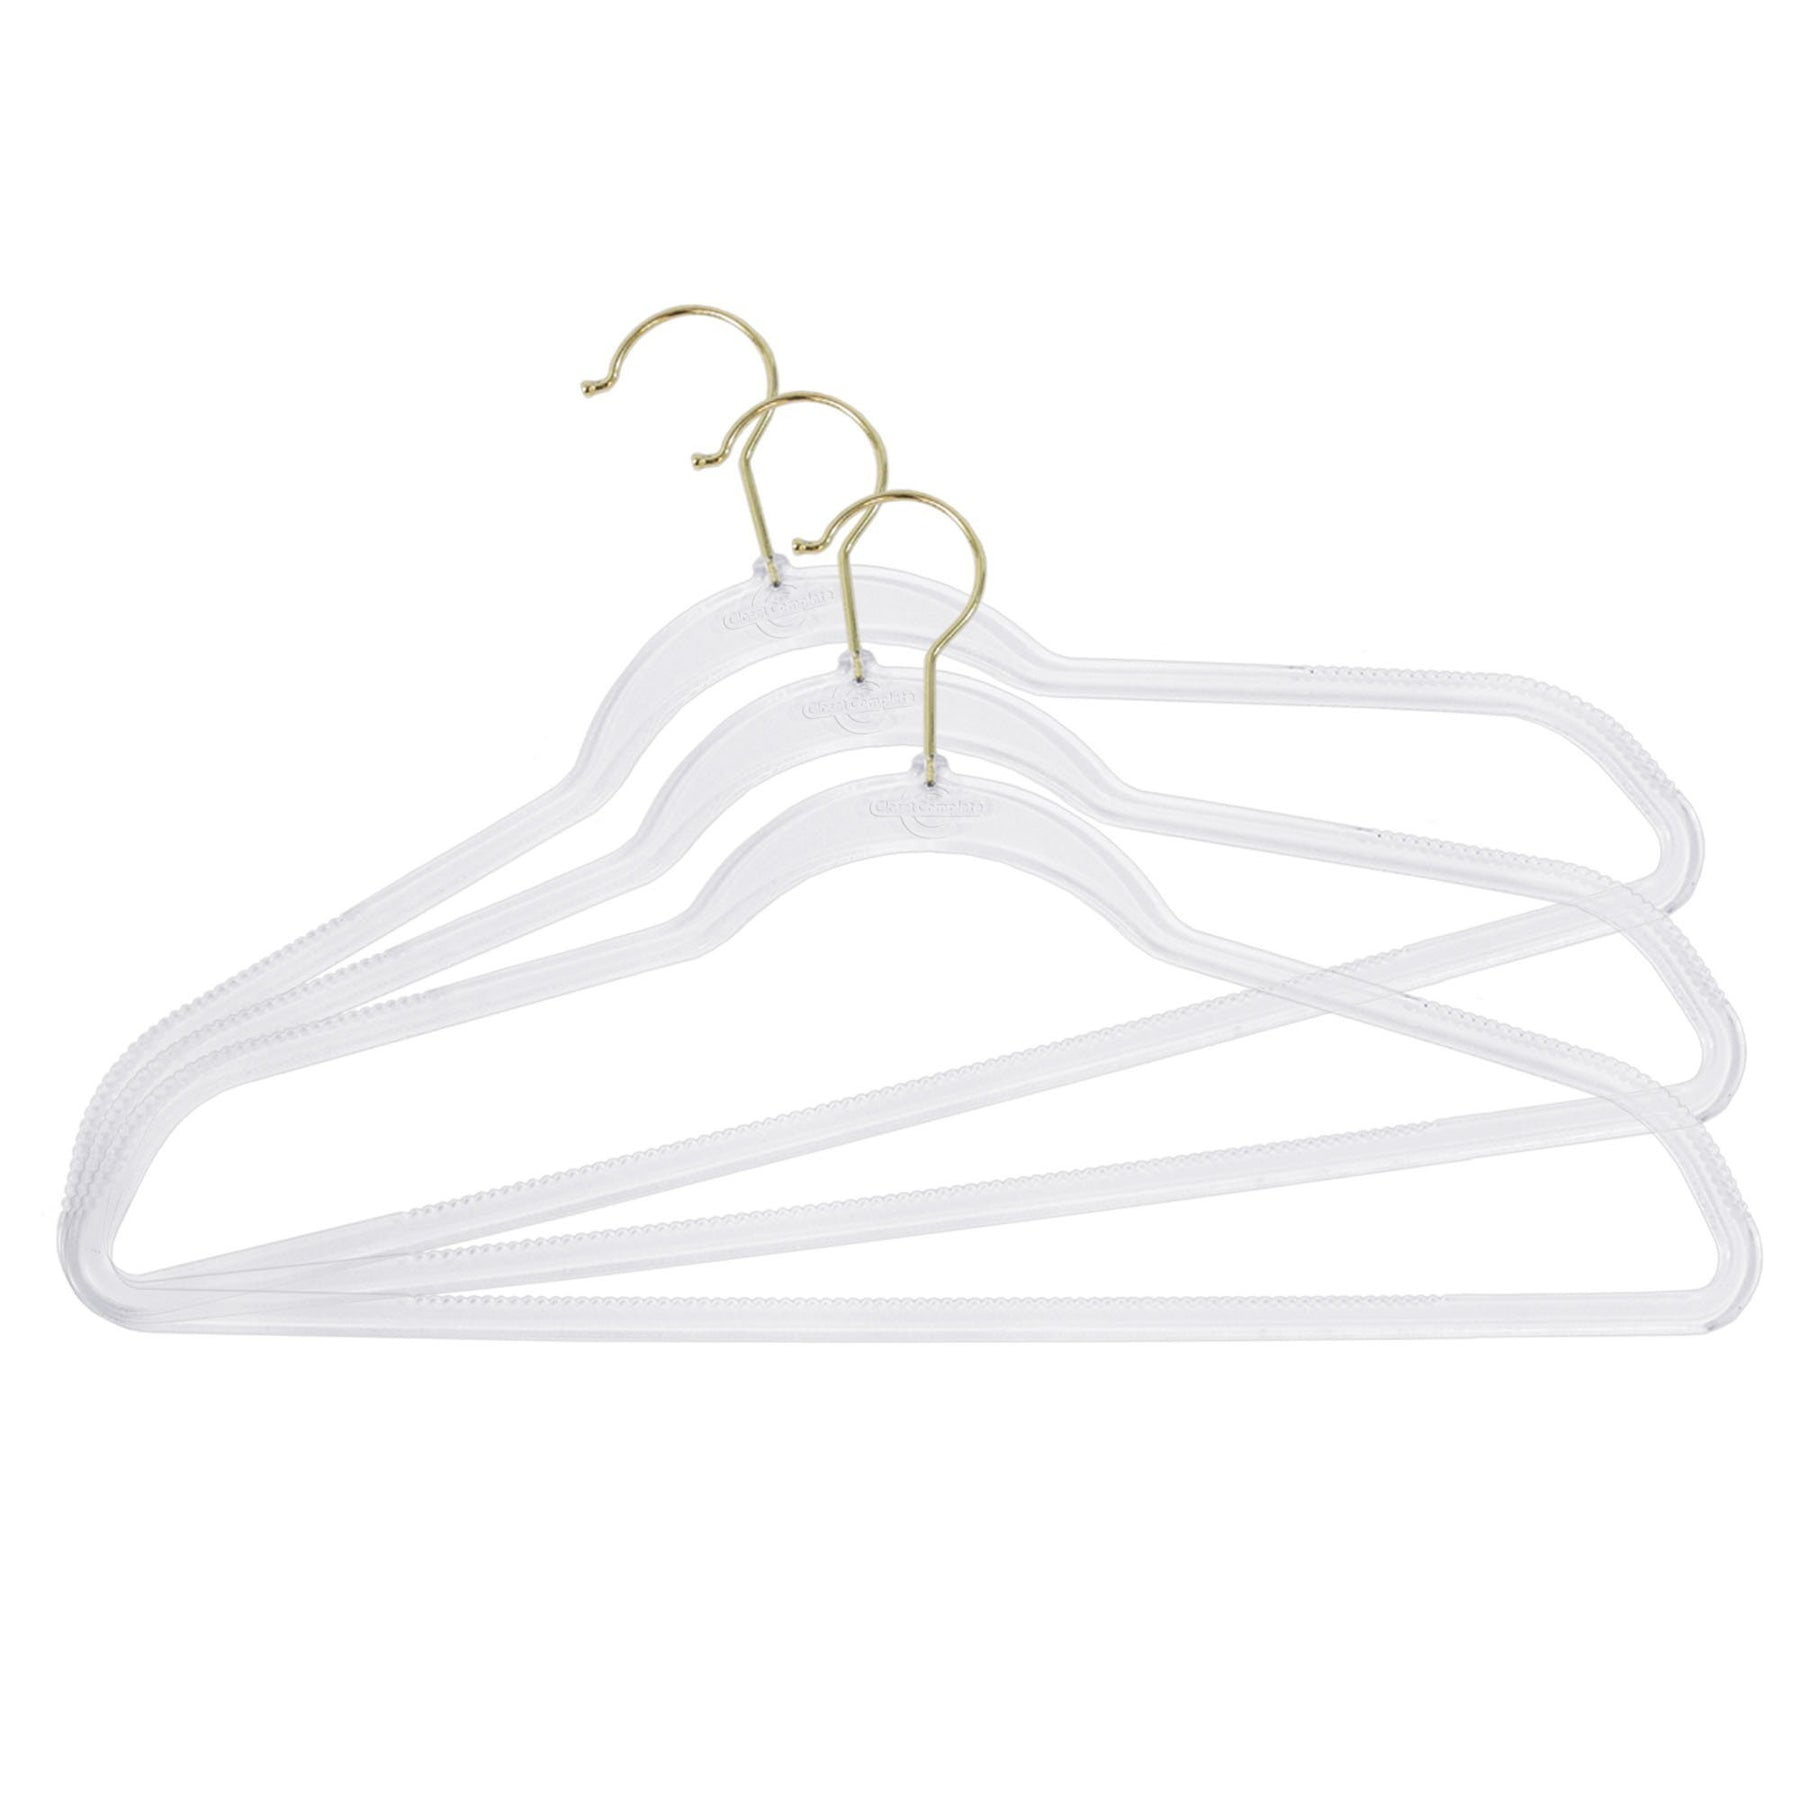 https://www.closetcomplete.com/cdn/shop/products/closet-complete-acrylic-hangers-completely-clear-non-slip-invisible-acrylic-hangers-69194s-7162747519061_1800x1800.jpg?v=1552517801